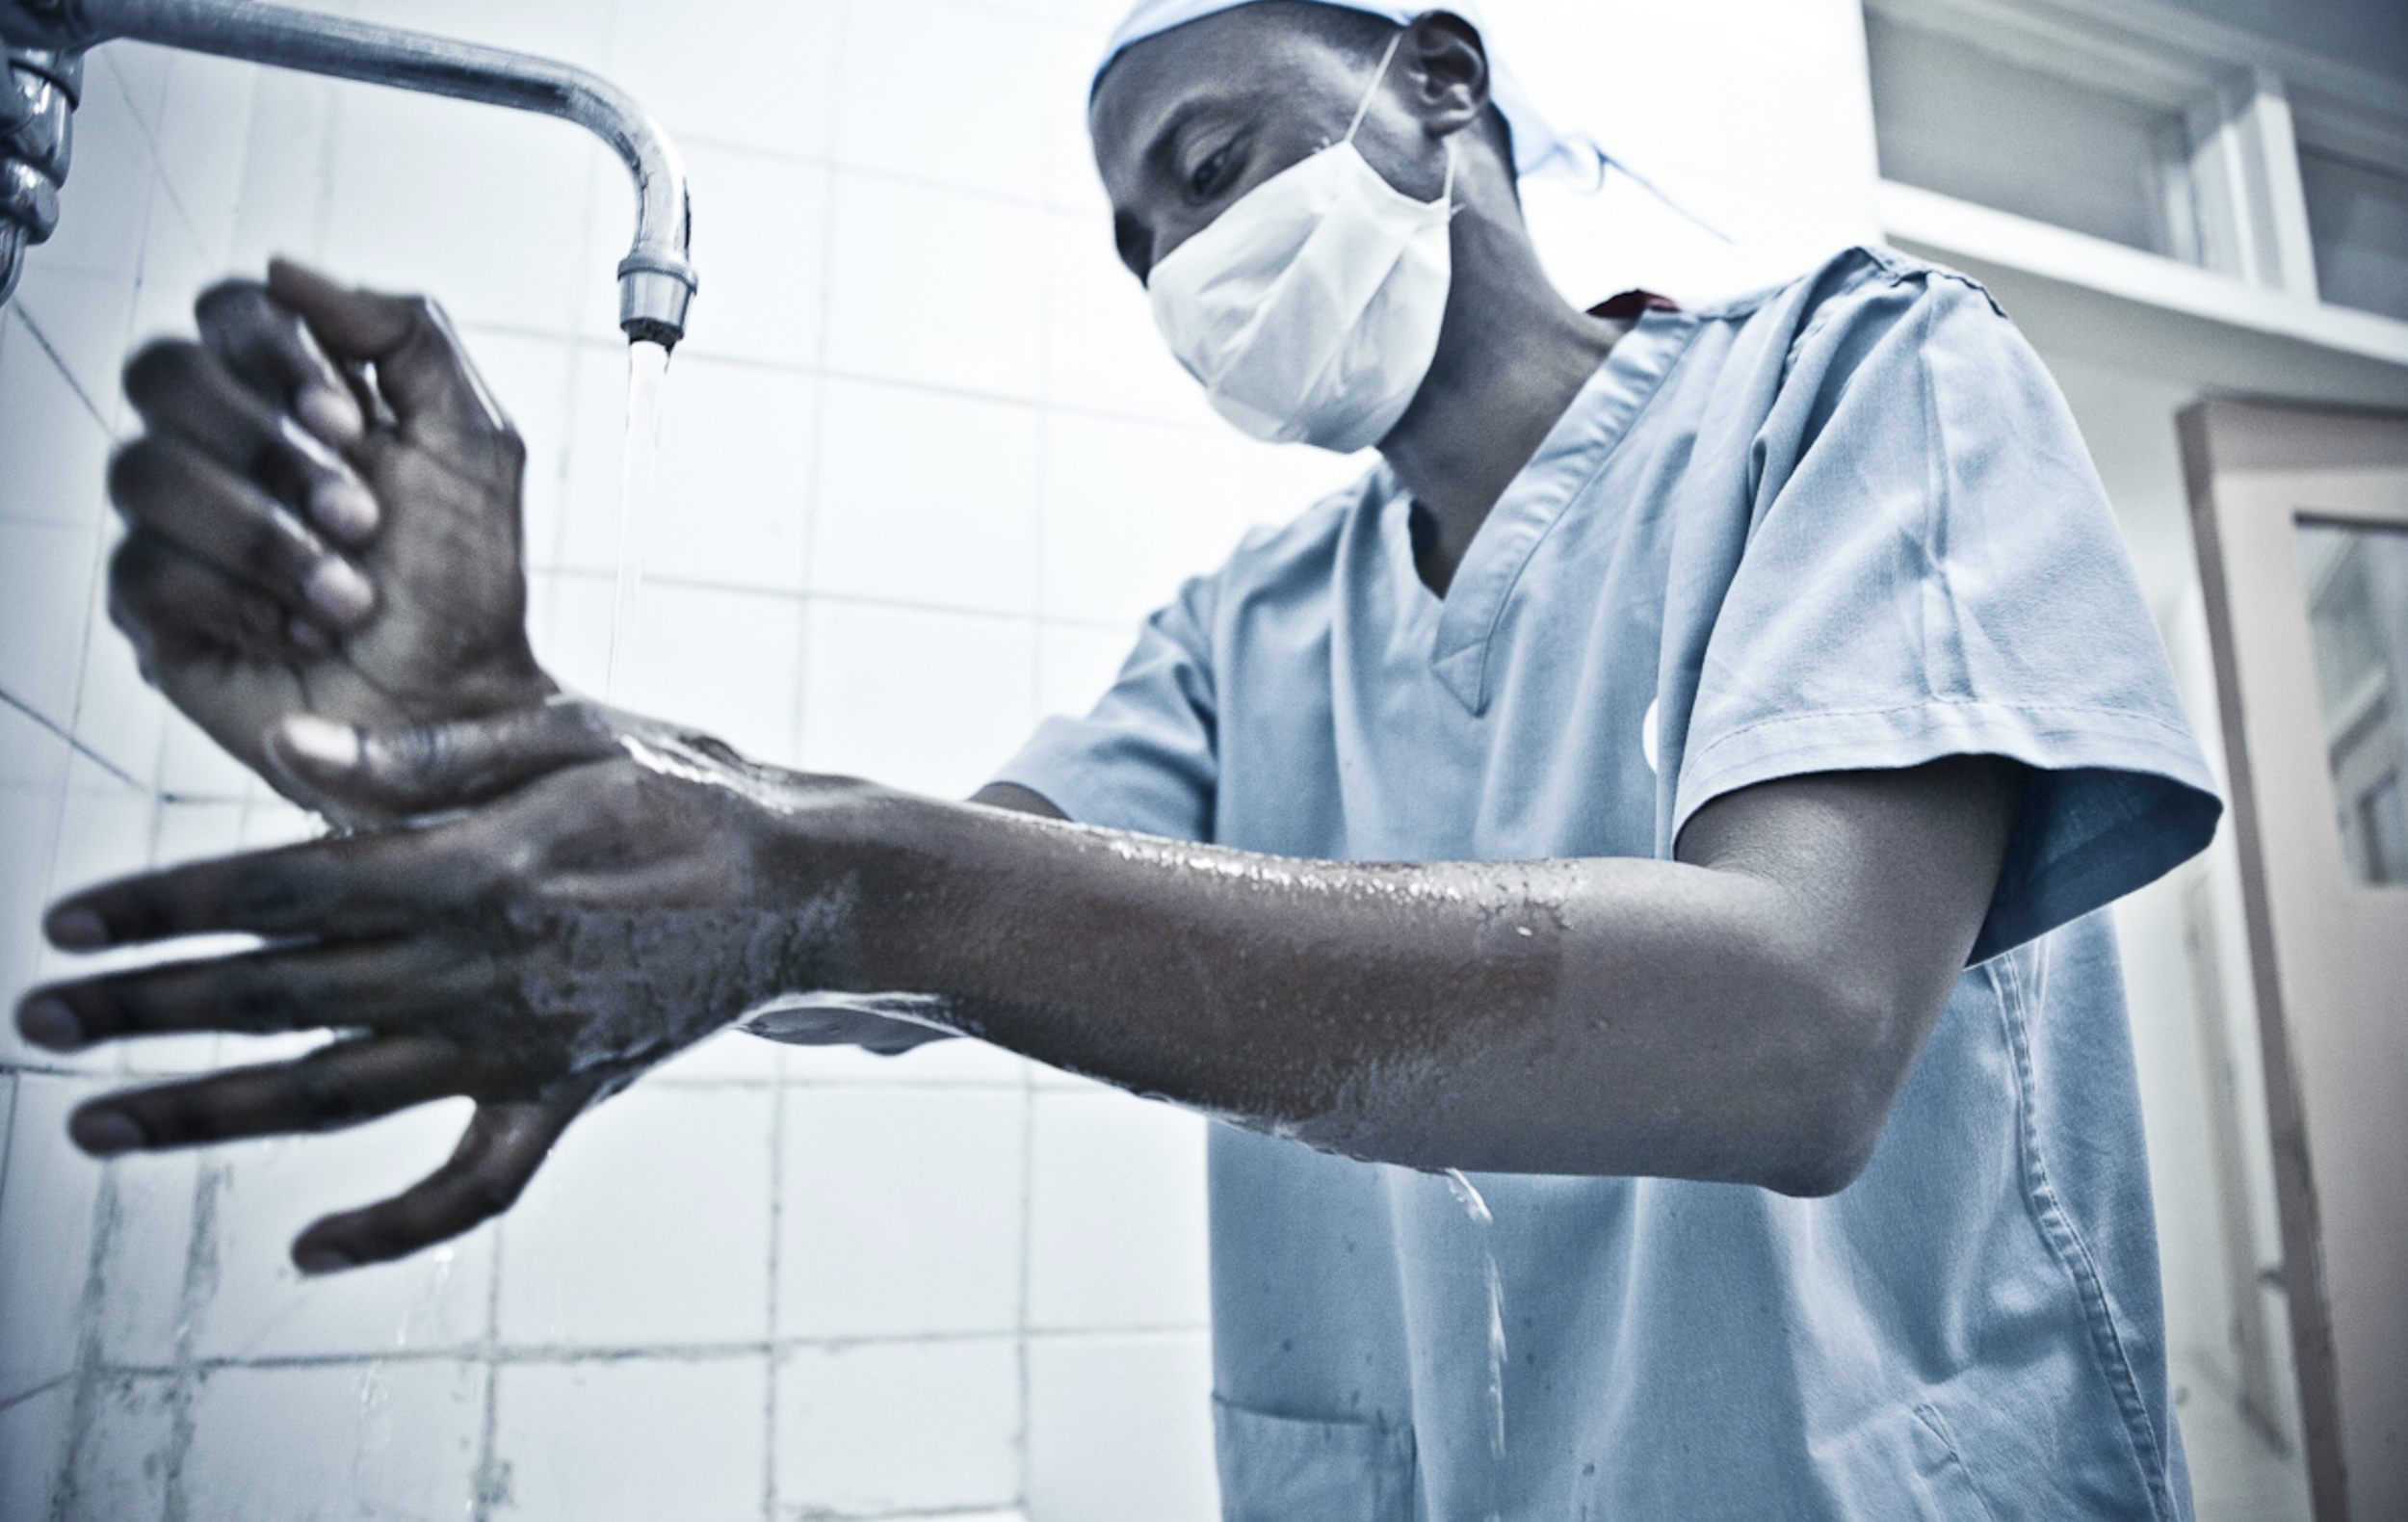  The surgeon cleaning his hands before starting surgery 